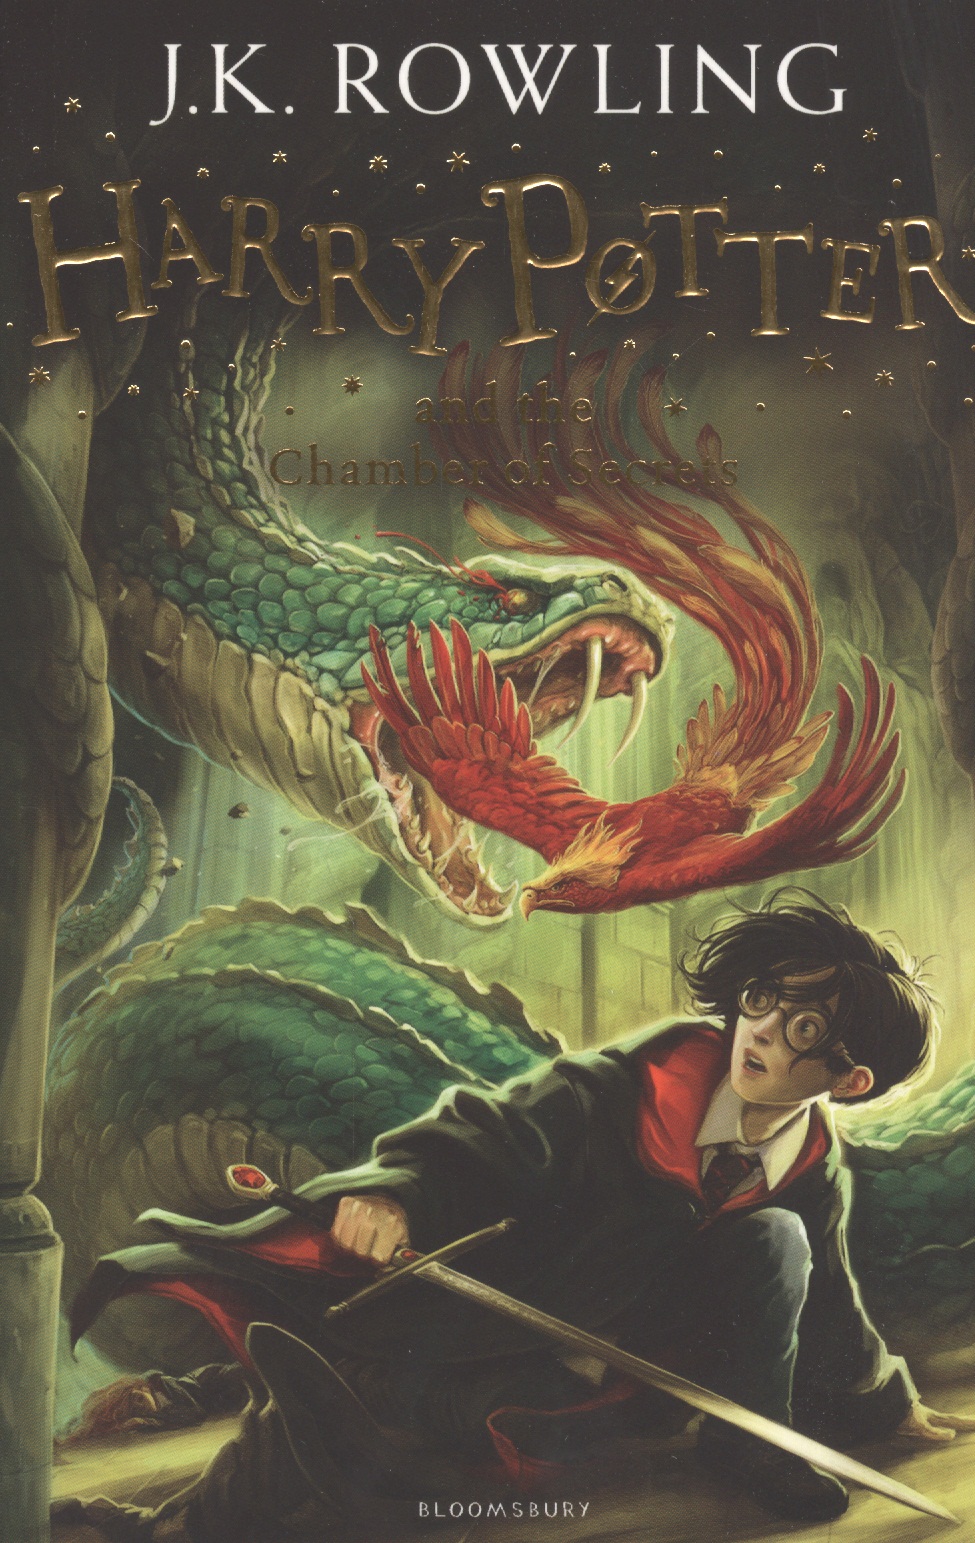 Harry Potter and the Chamber of Secrets. (In reading order: 2)